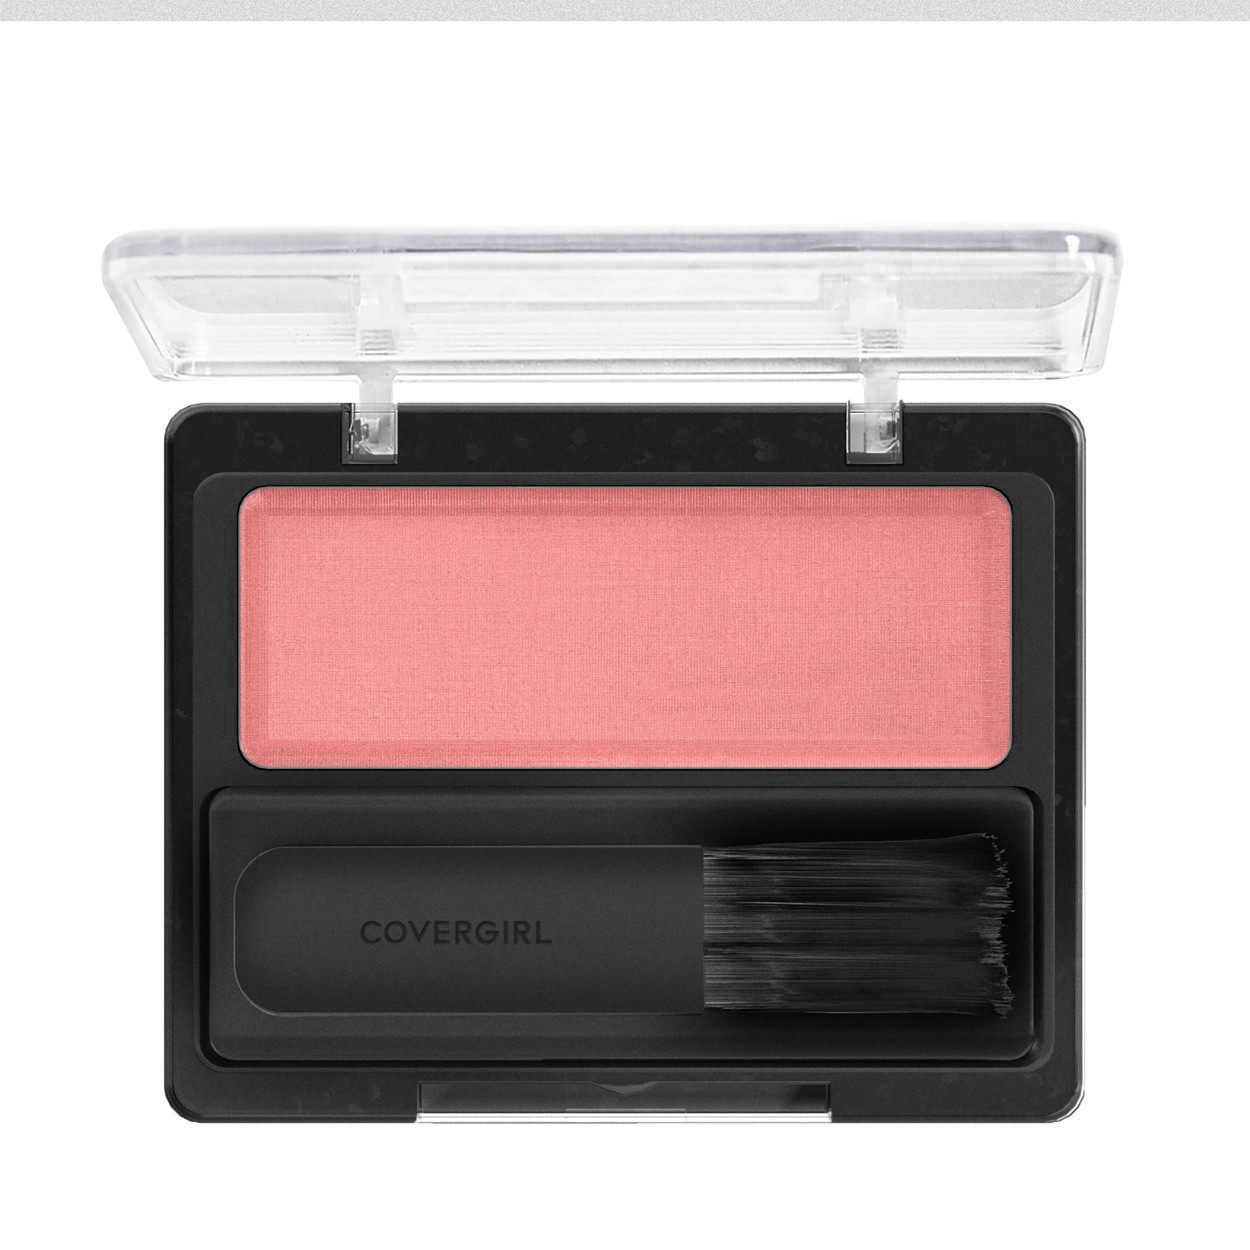 slide 3 of 42, COTY COVERGIRL COVERGIRL Classic Color Blush Rose Silk, 1 ct